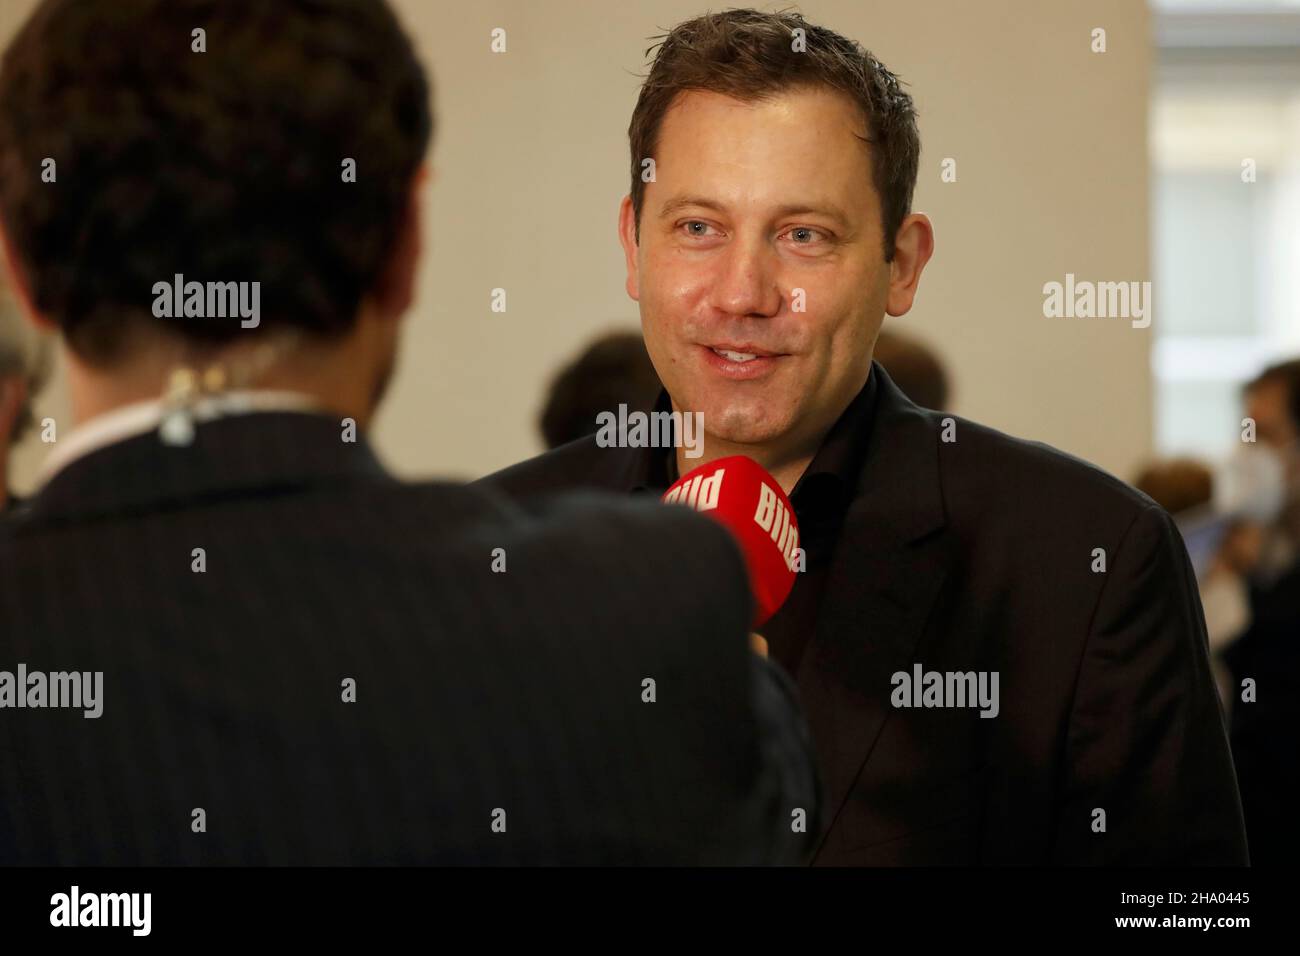 Berlin, Germany, December 8, 2021. Lars Klingbeil during an interview in the German Bundestag on the occasion of the election of Olaf Scholz. Stock Photo